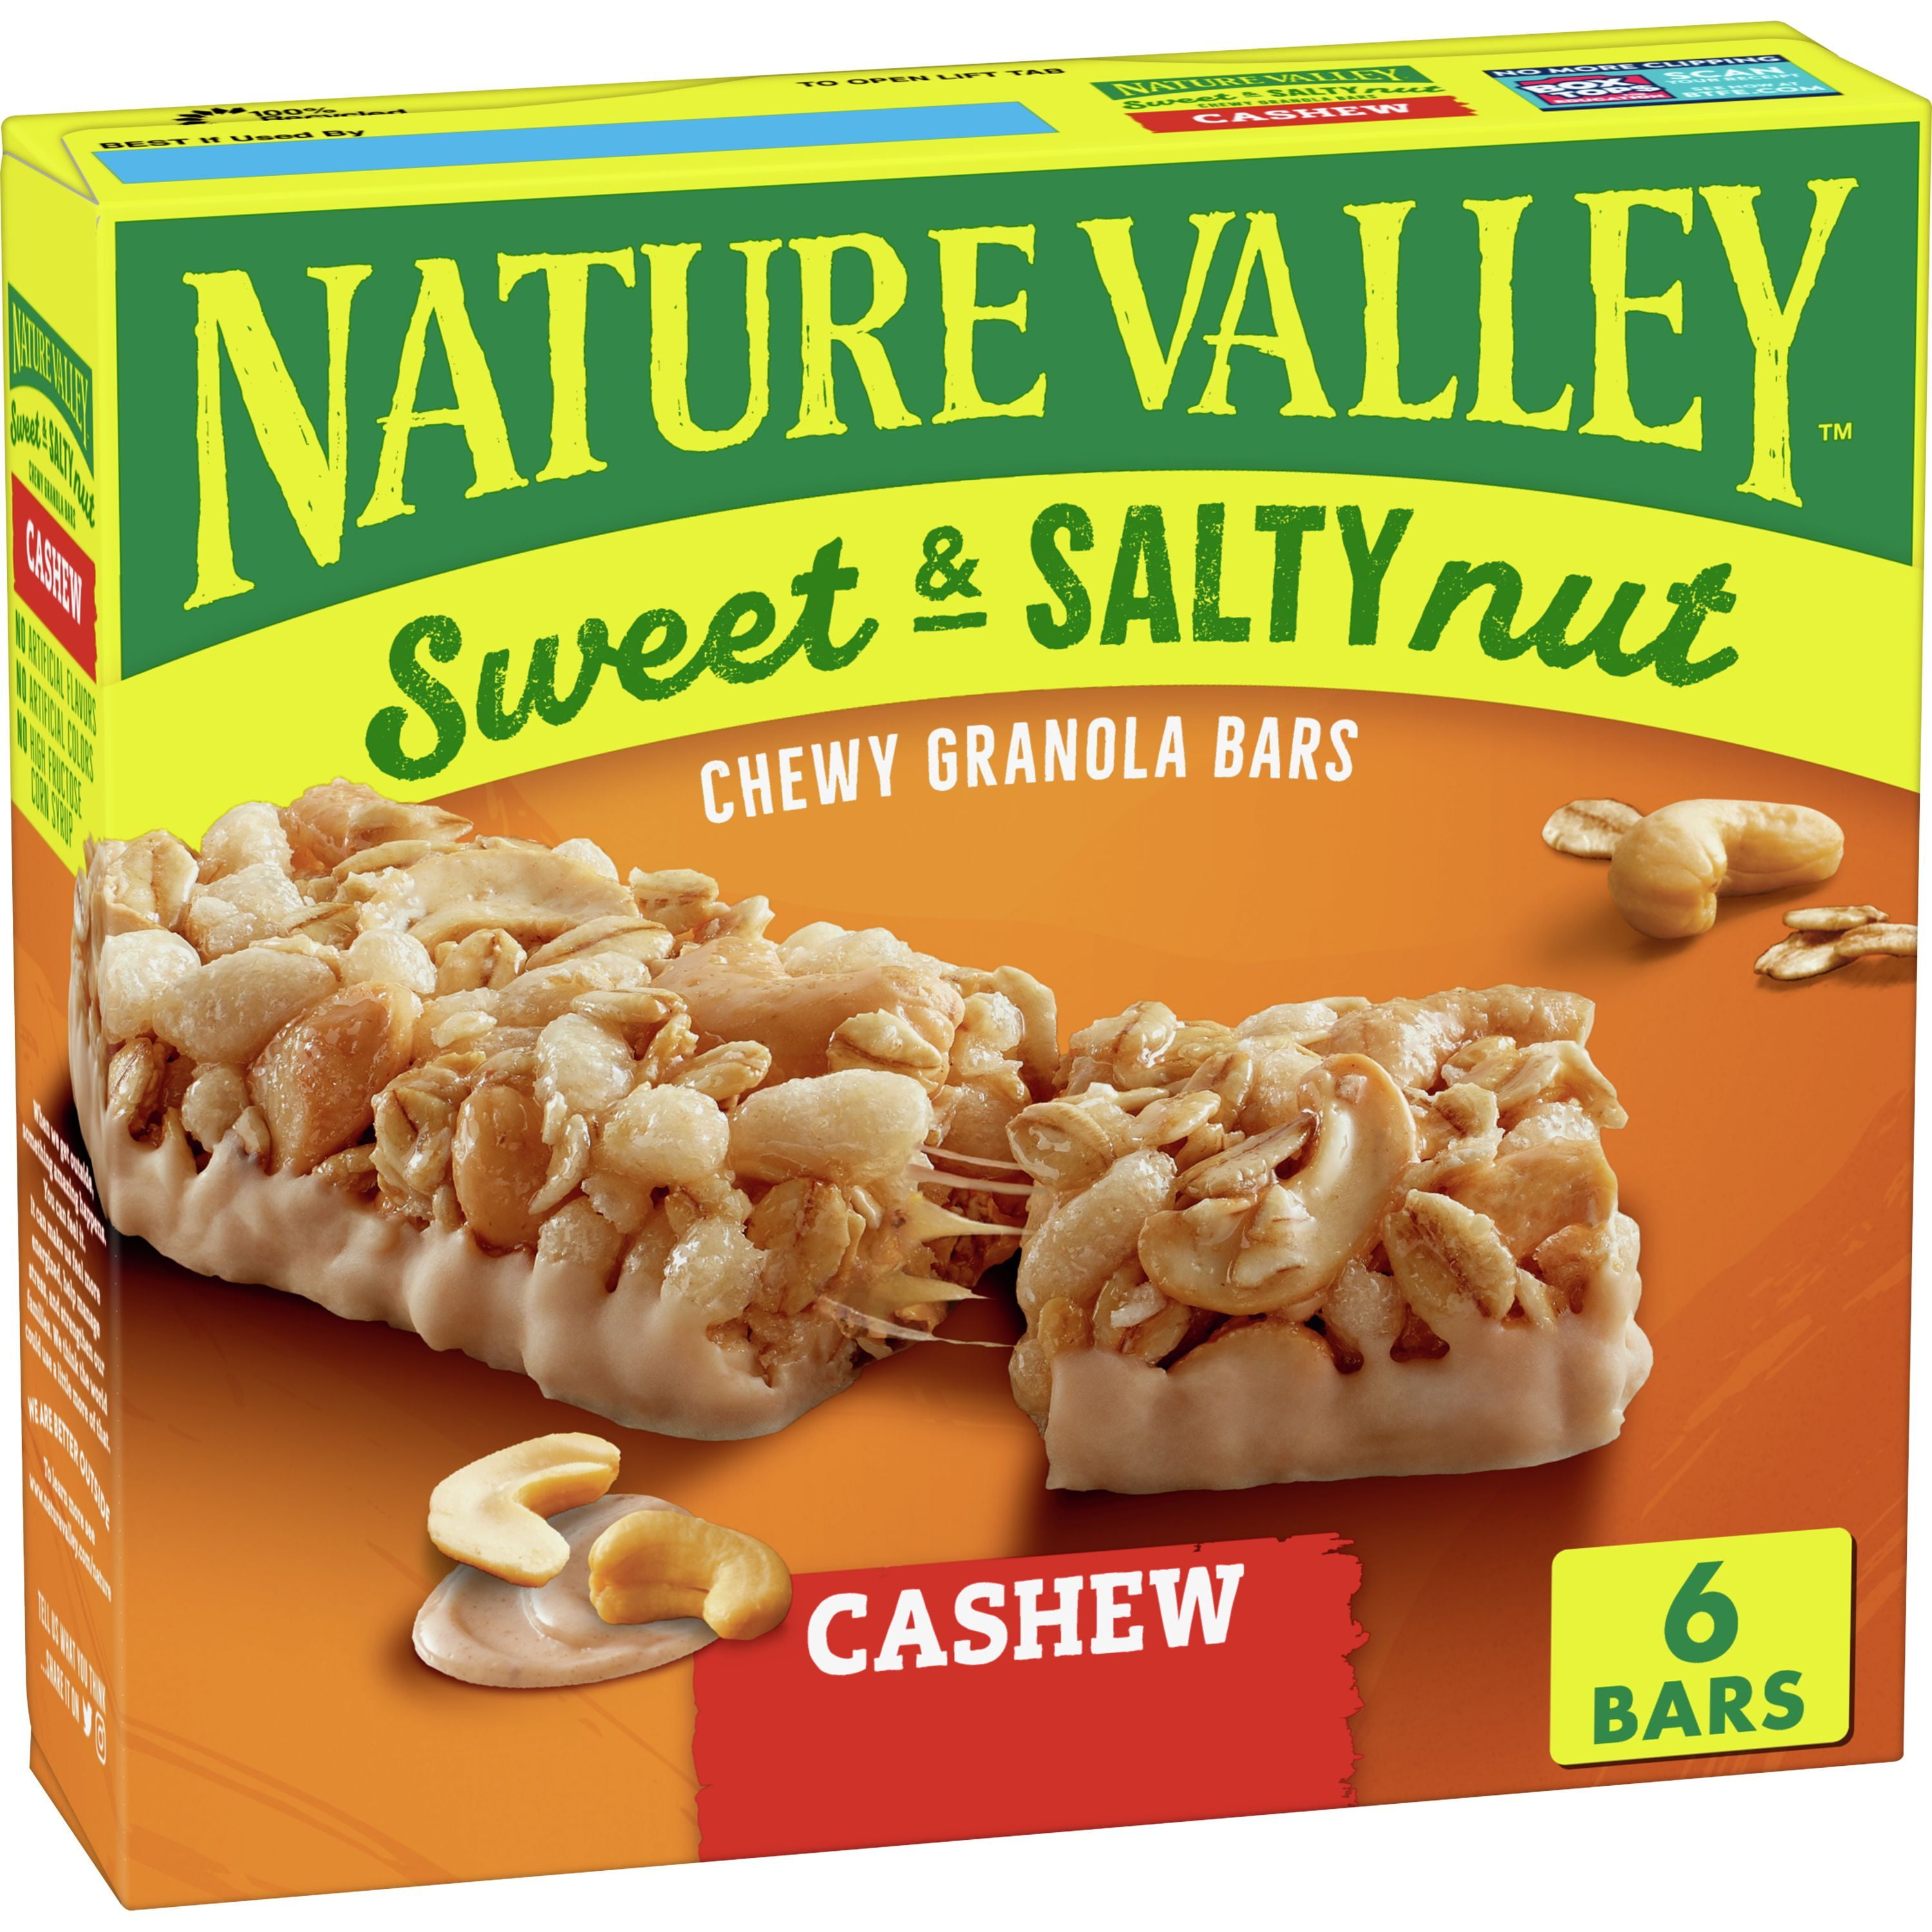 Nature Valley Granola Bars, Sweet and Salty Nut, Cashew, 1.2 oz, 6 ct